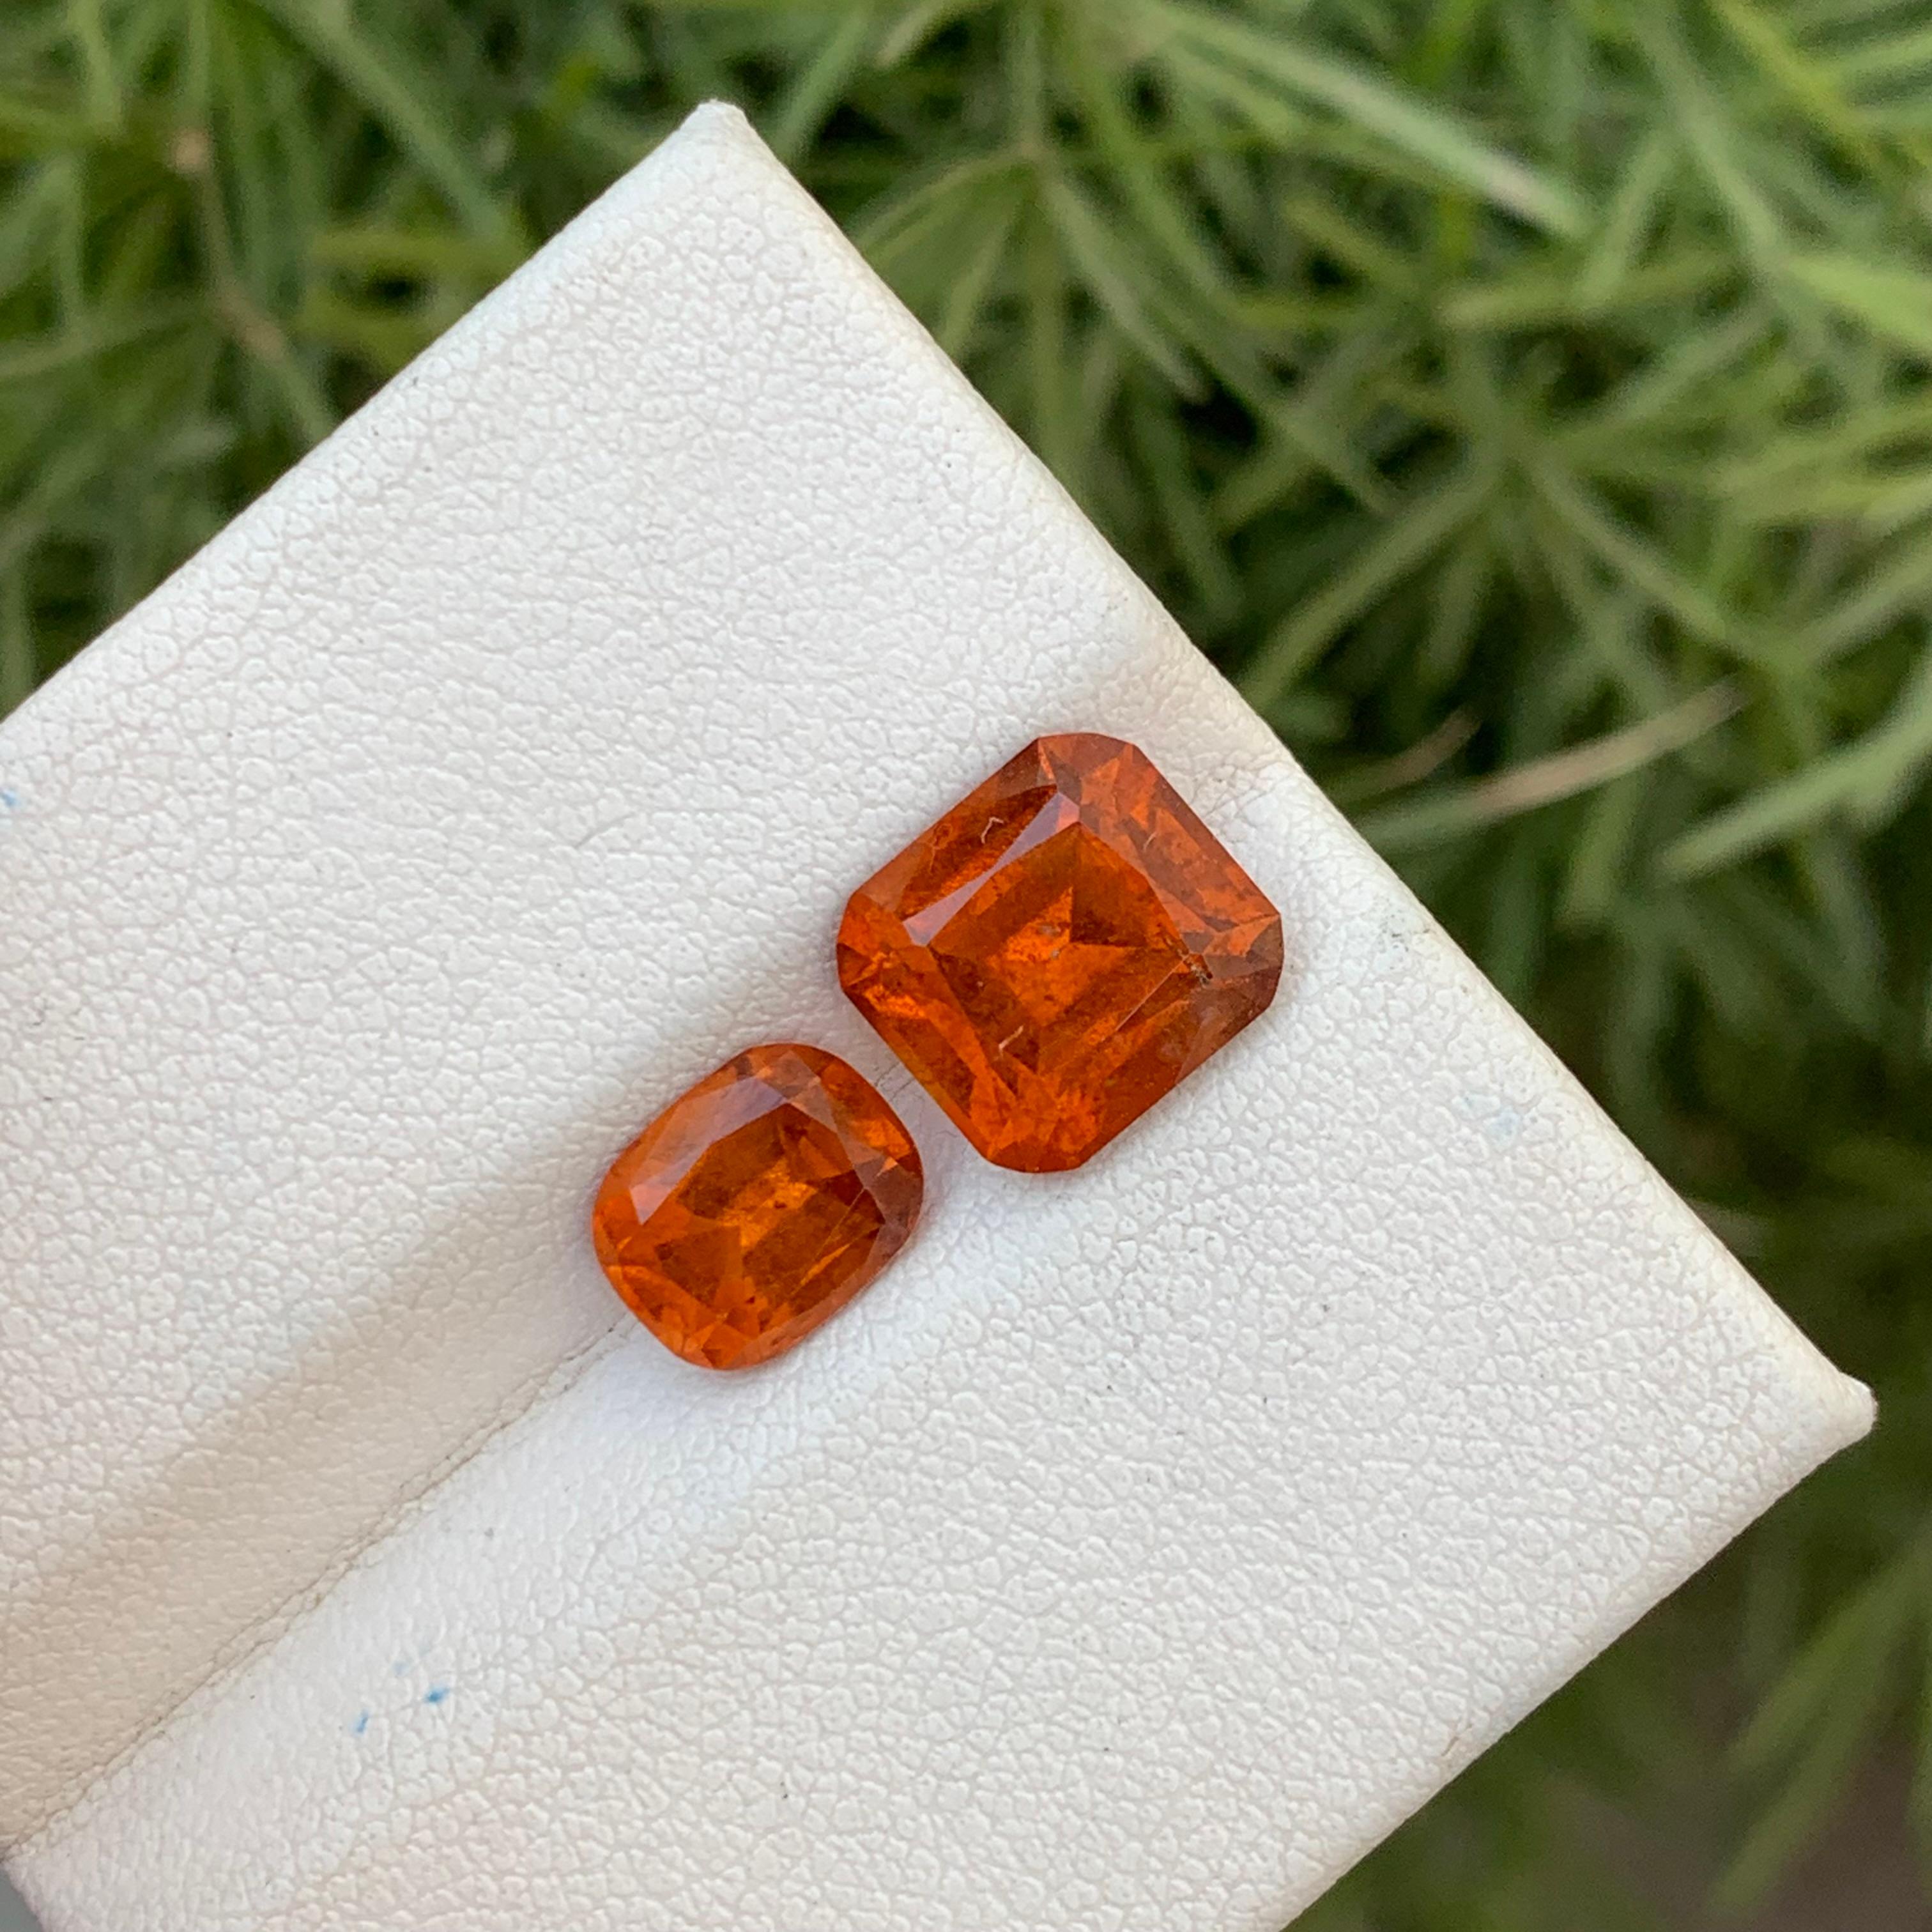 5.95 Carats Natural Loose Hessonite Garnet 2 Pieces For Ring Jewelry Making  en vente 9